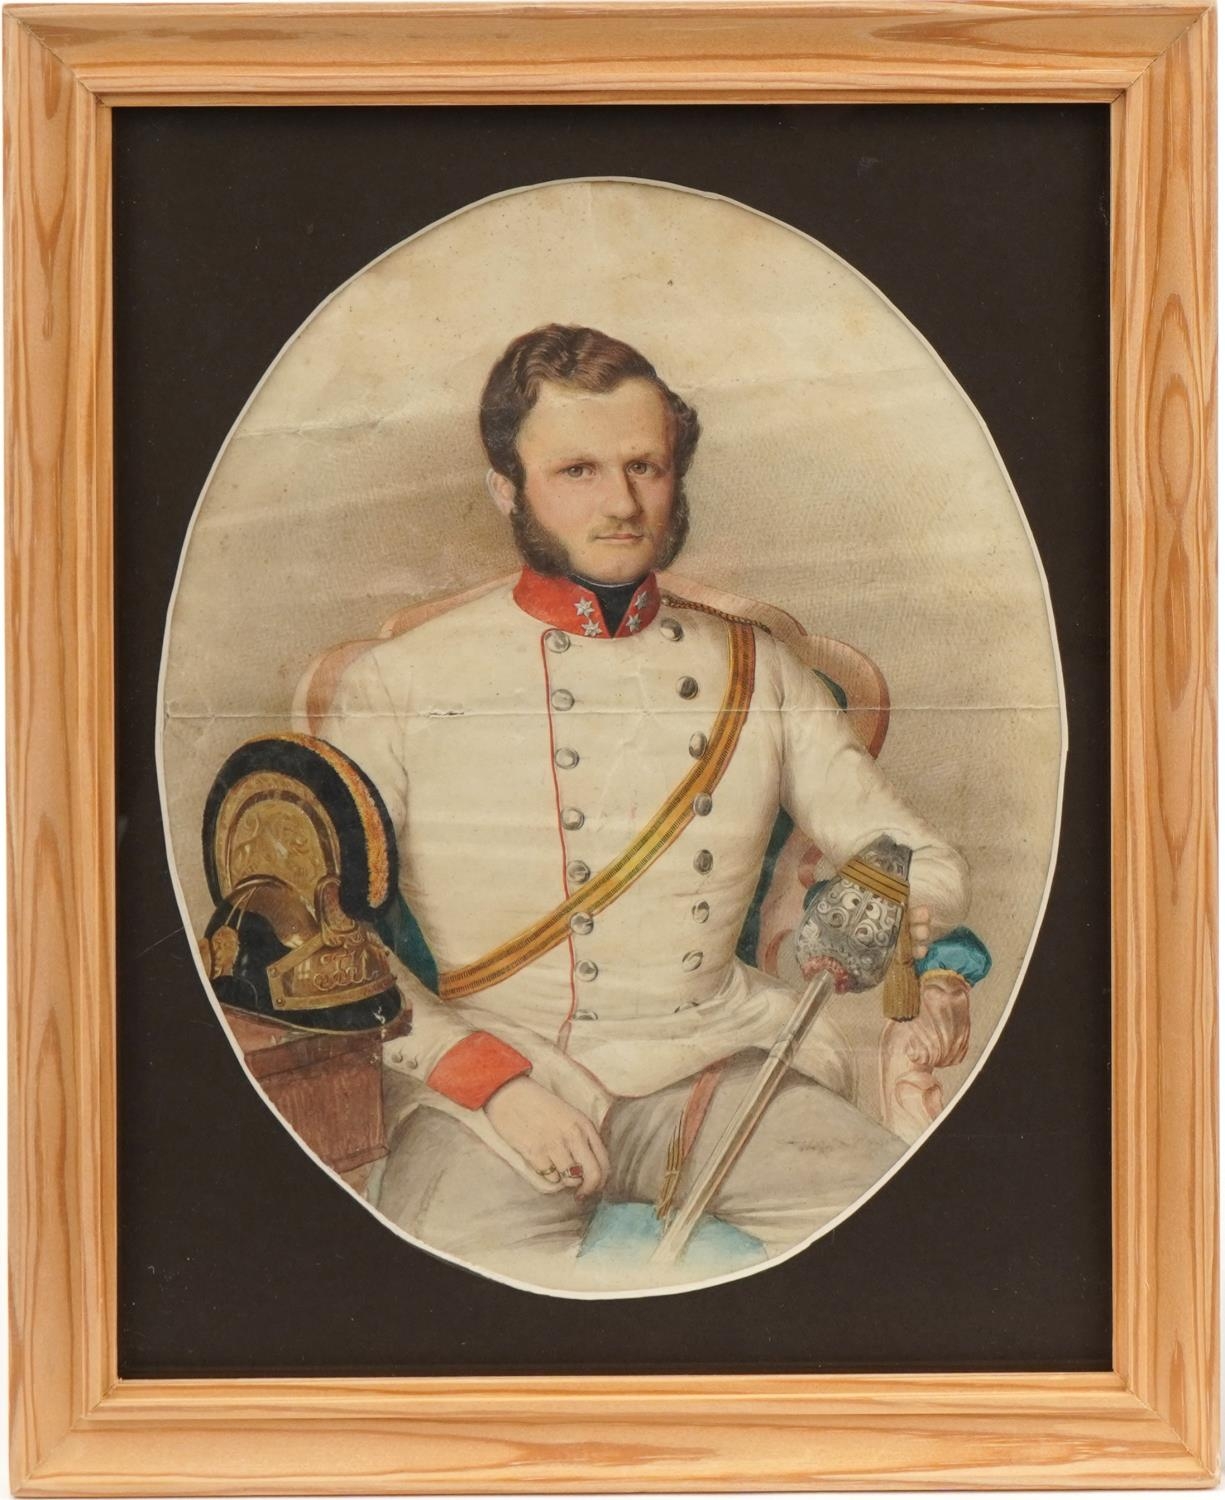 Top half portrait of a Prussian officer in military uniform, 19th century military interest - Image 3 of 7